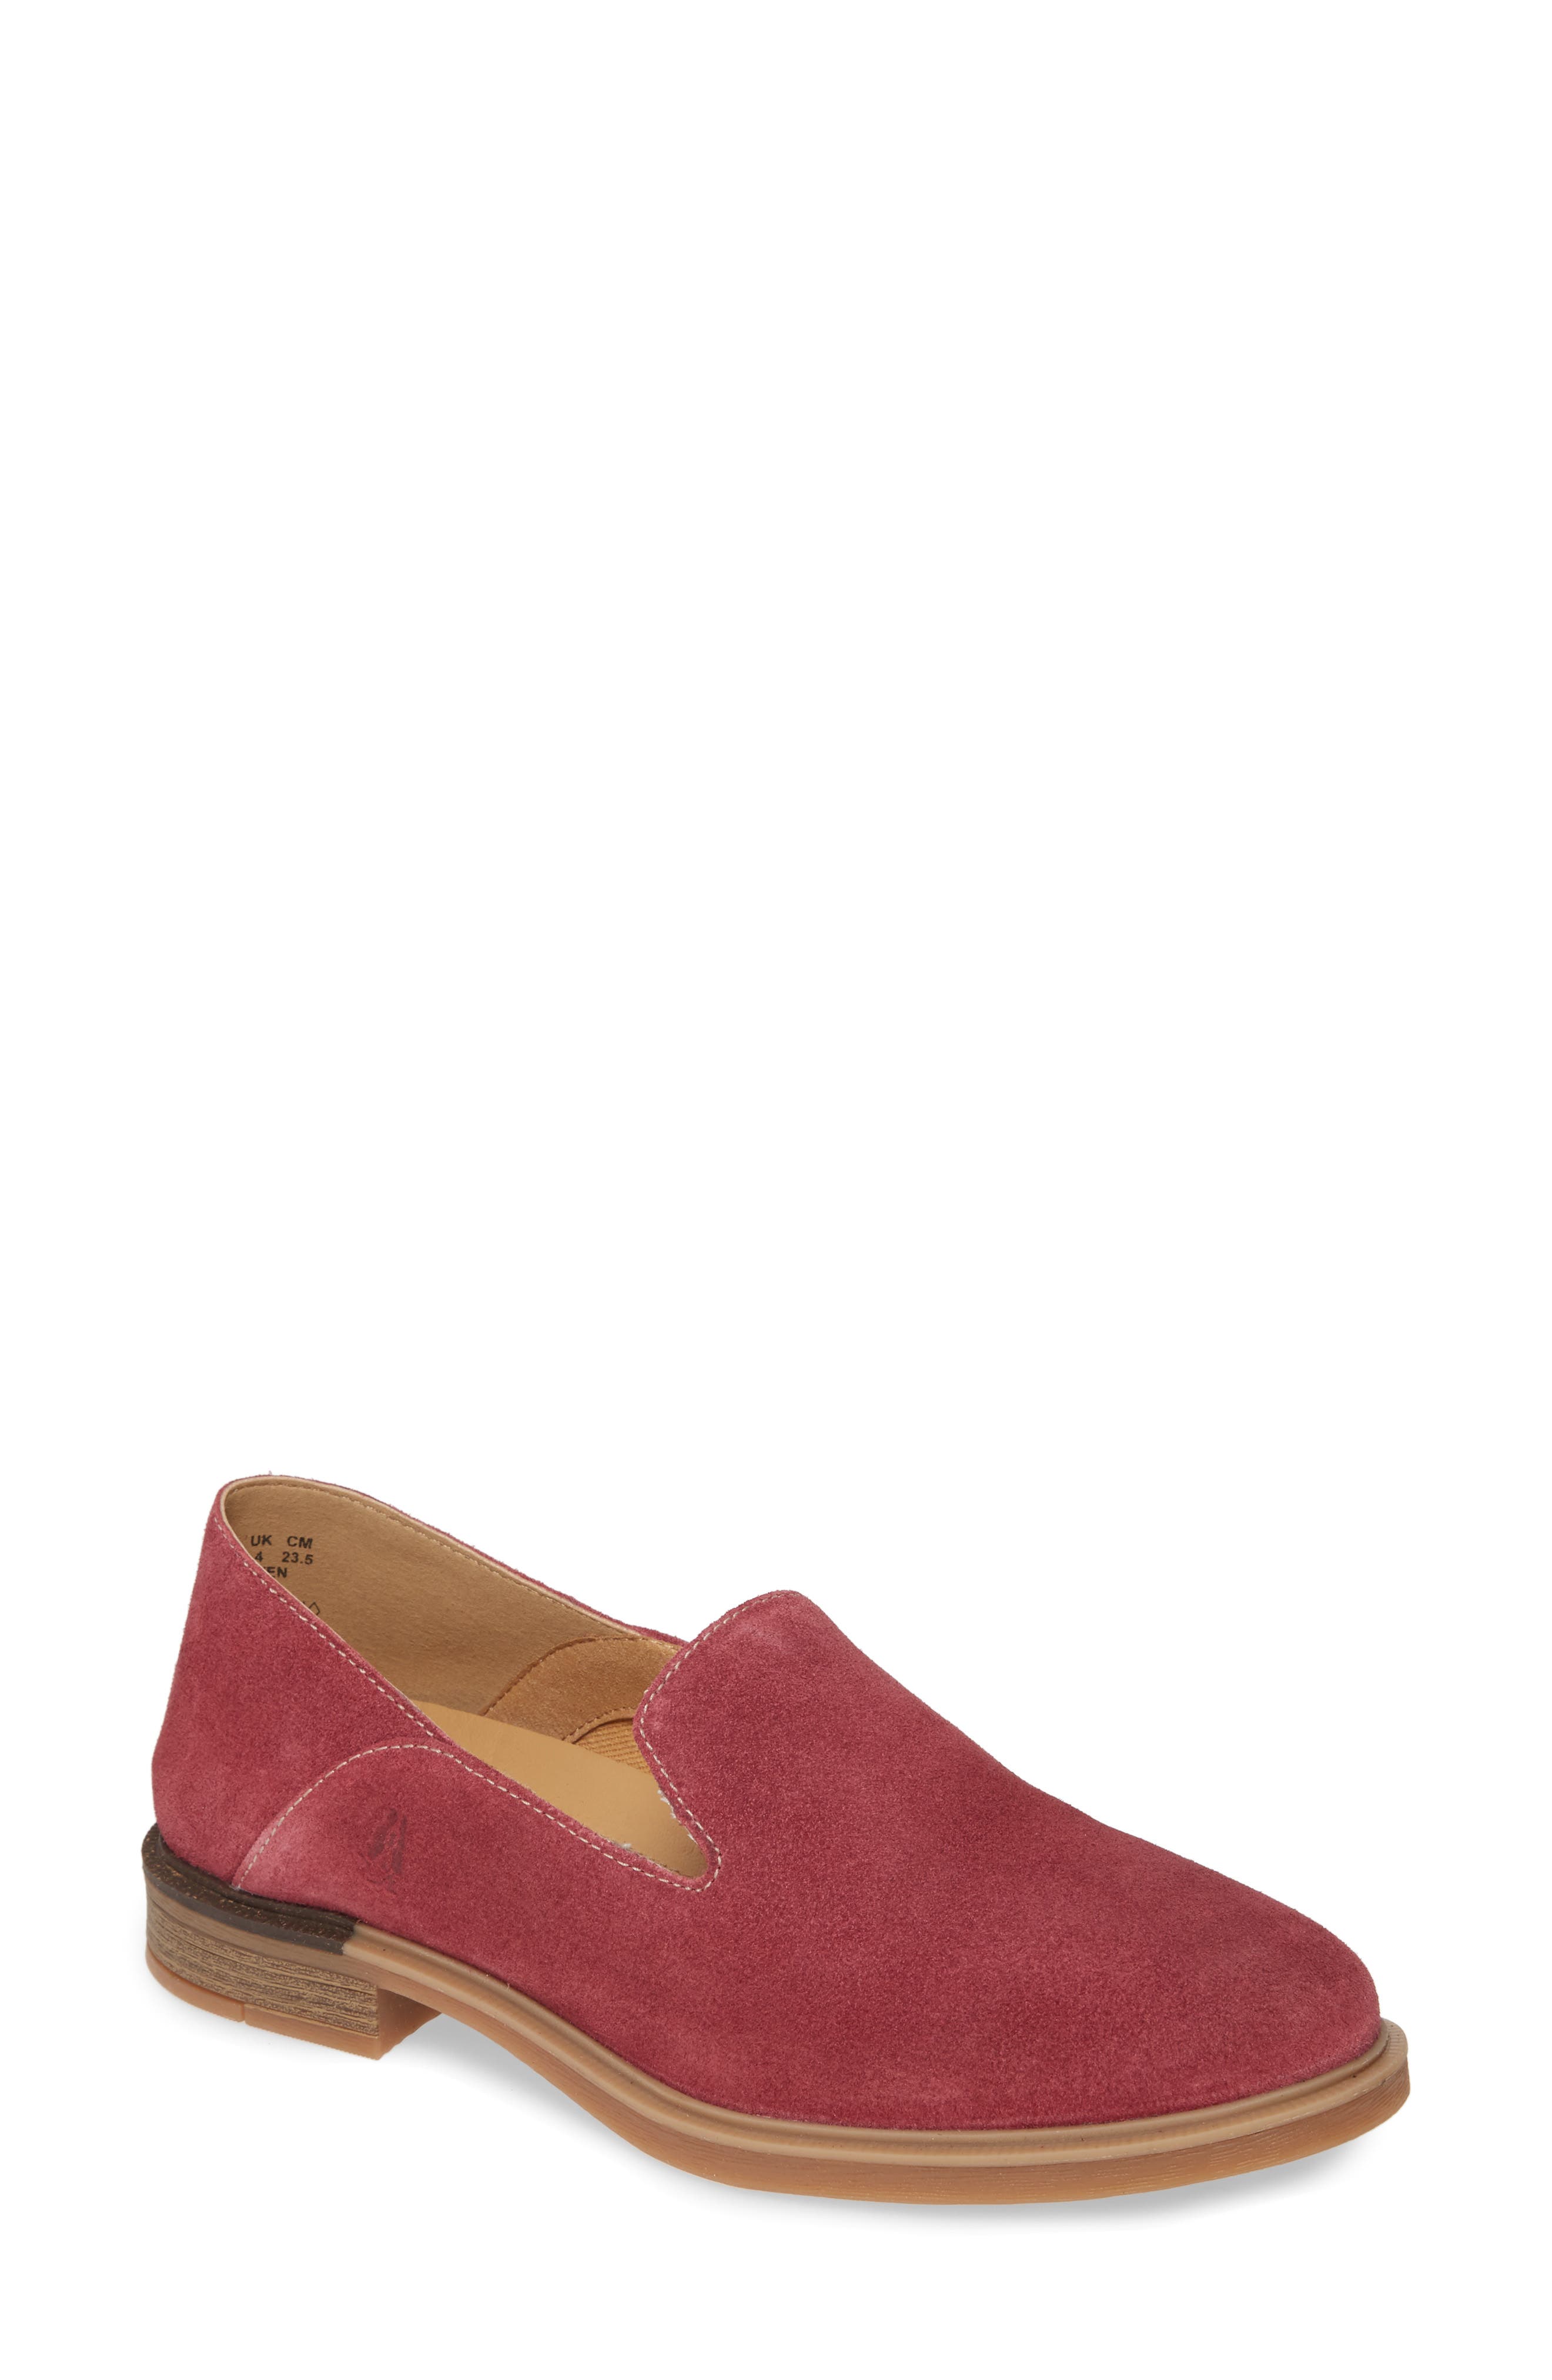 Hush Puppies | Bailey Slip-On Loafer 